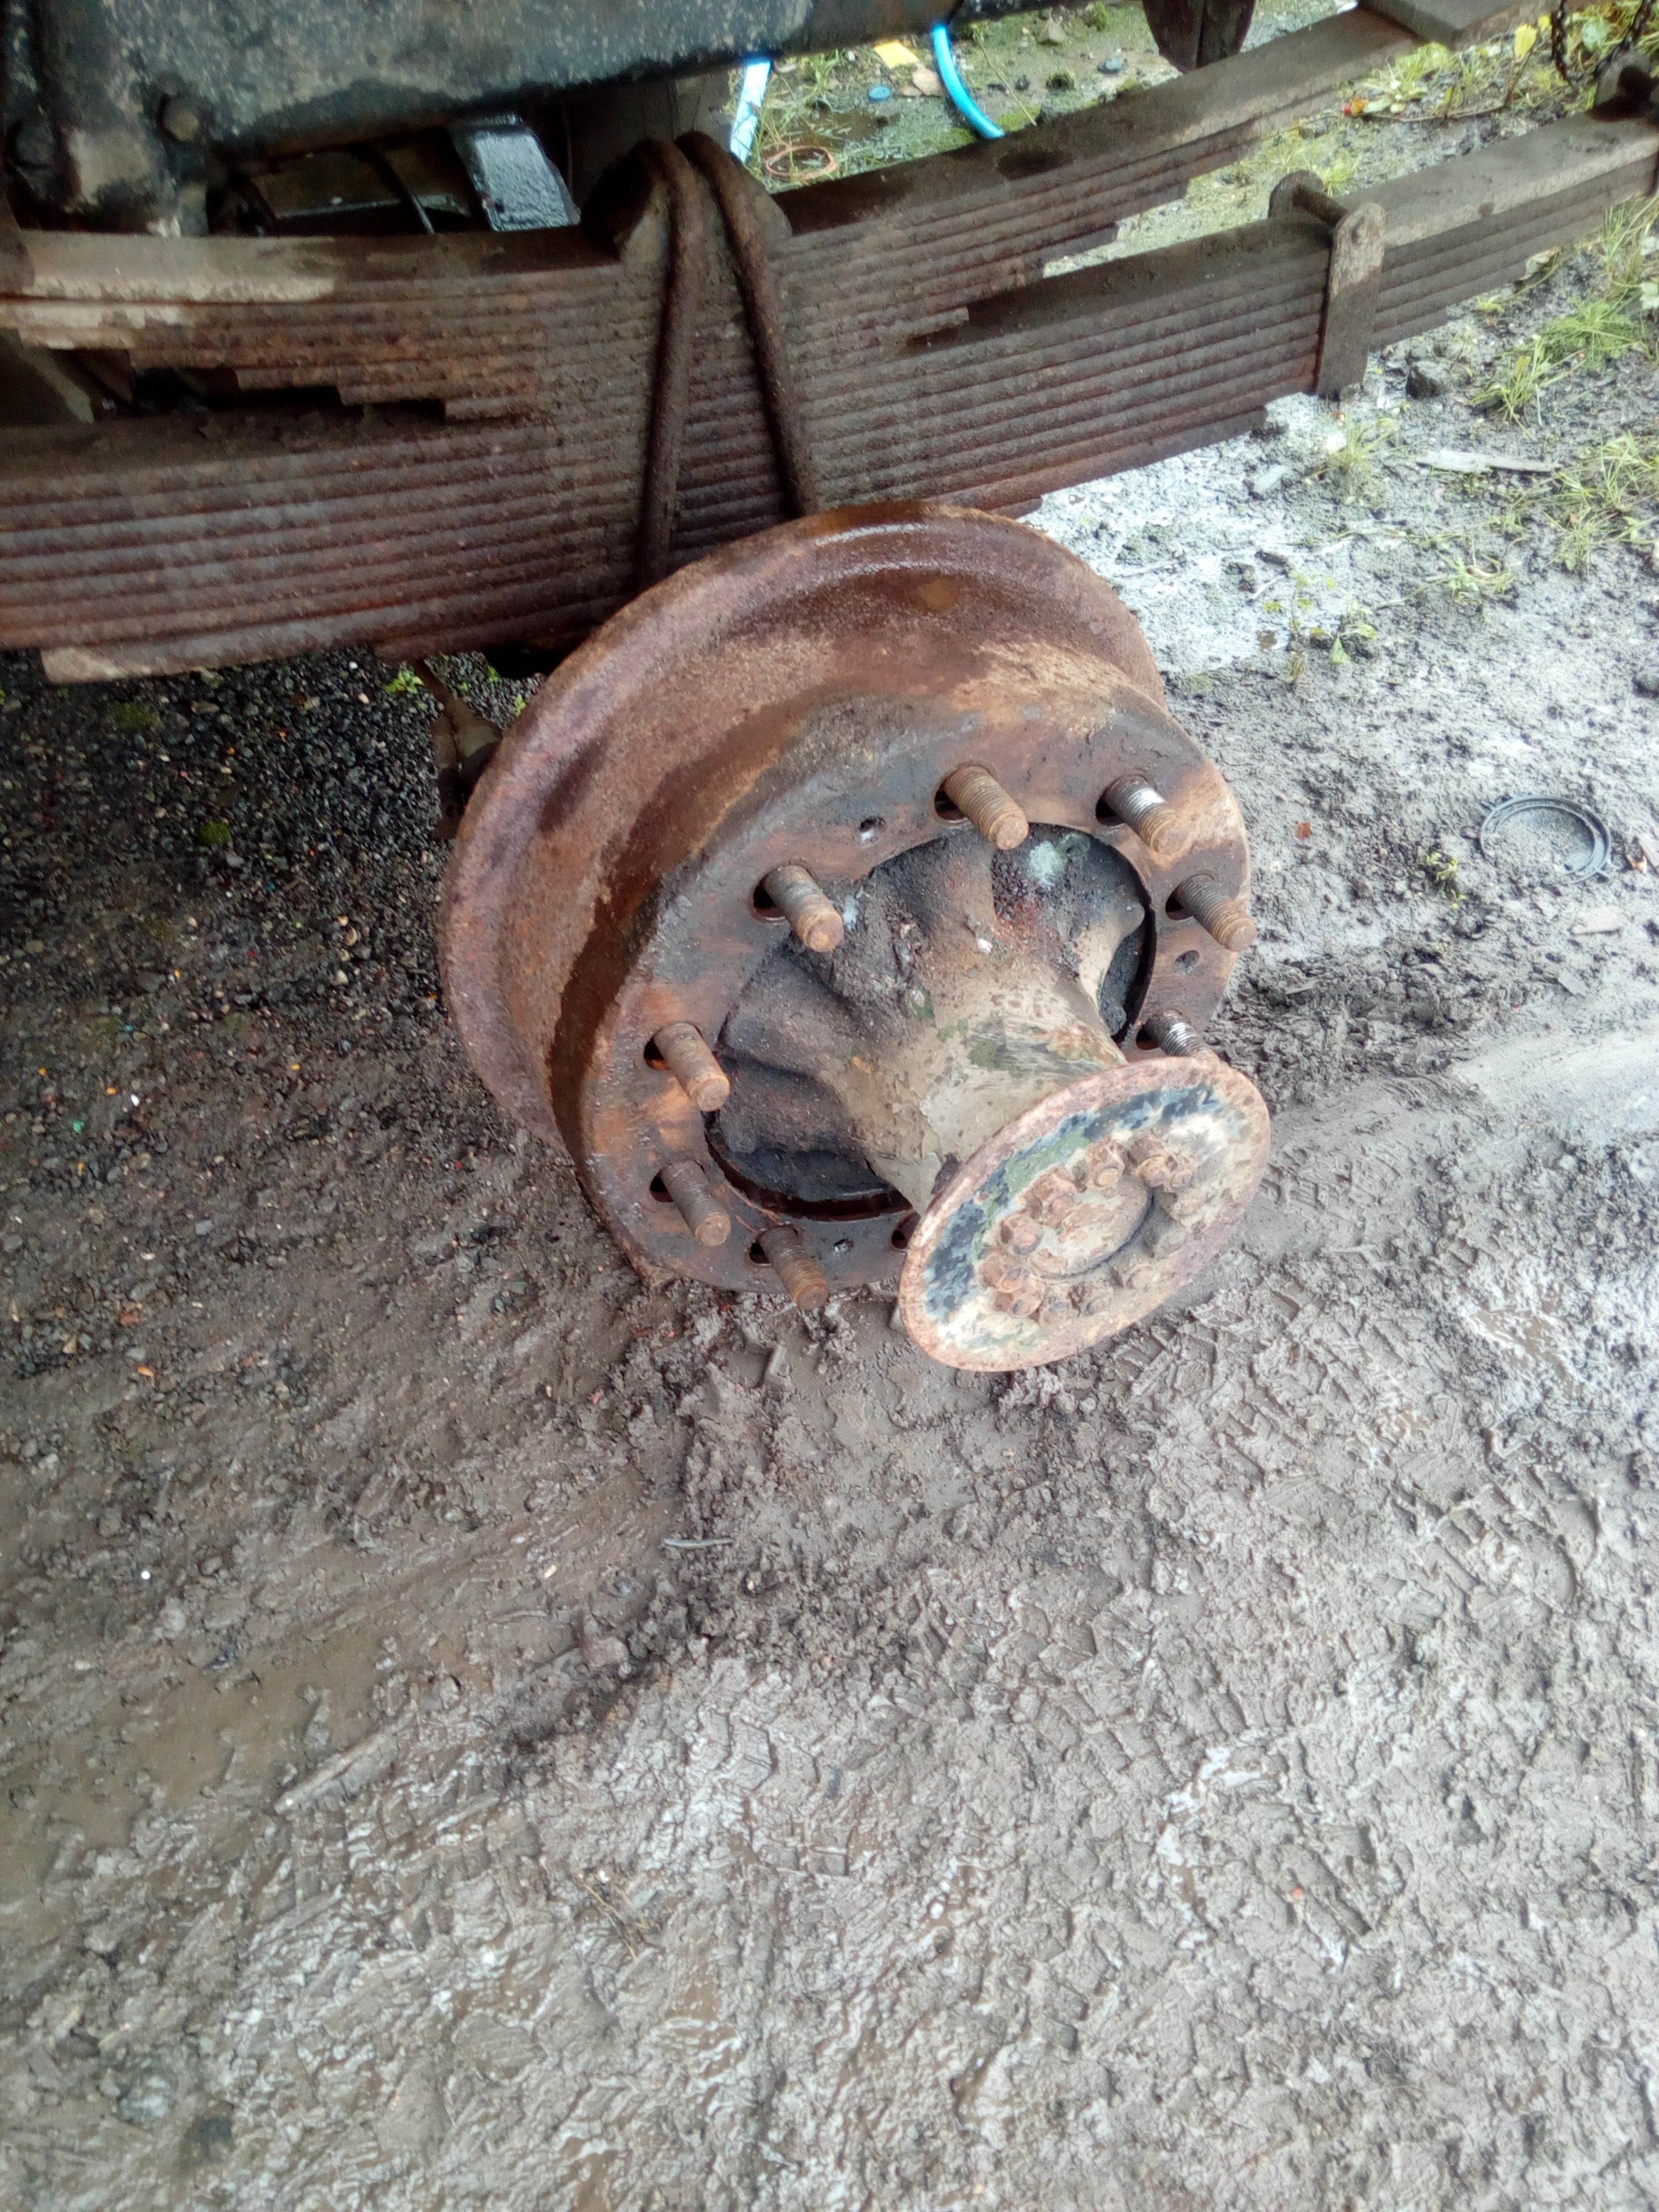 A photograph showing the back axle of the truck, with the brake
drum slid almost completely off